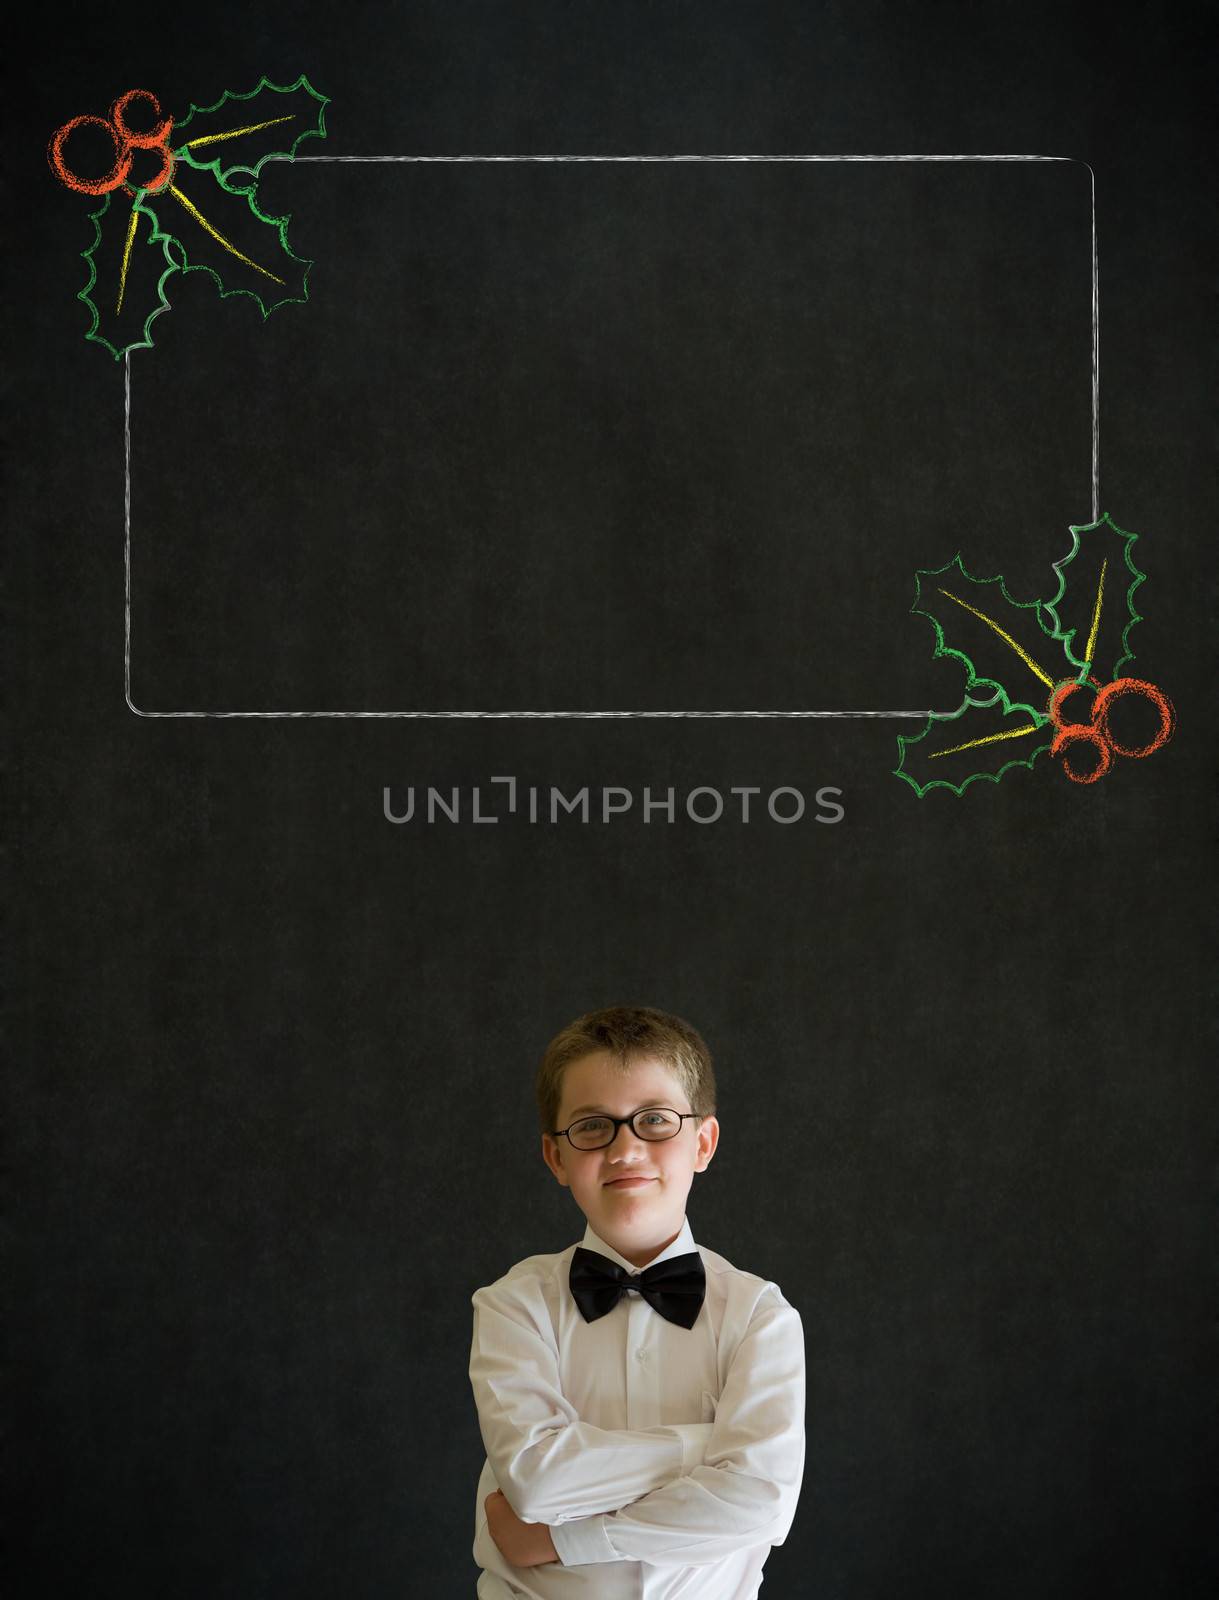 Thinking boy dressed up as business man with Christmas holly to do checklist on blackboard background